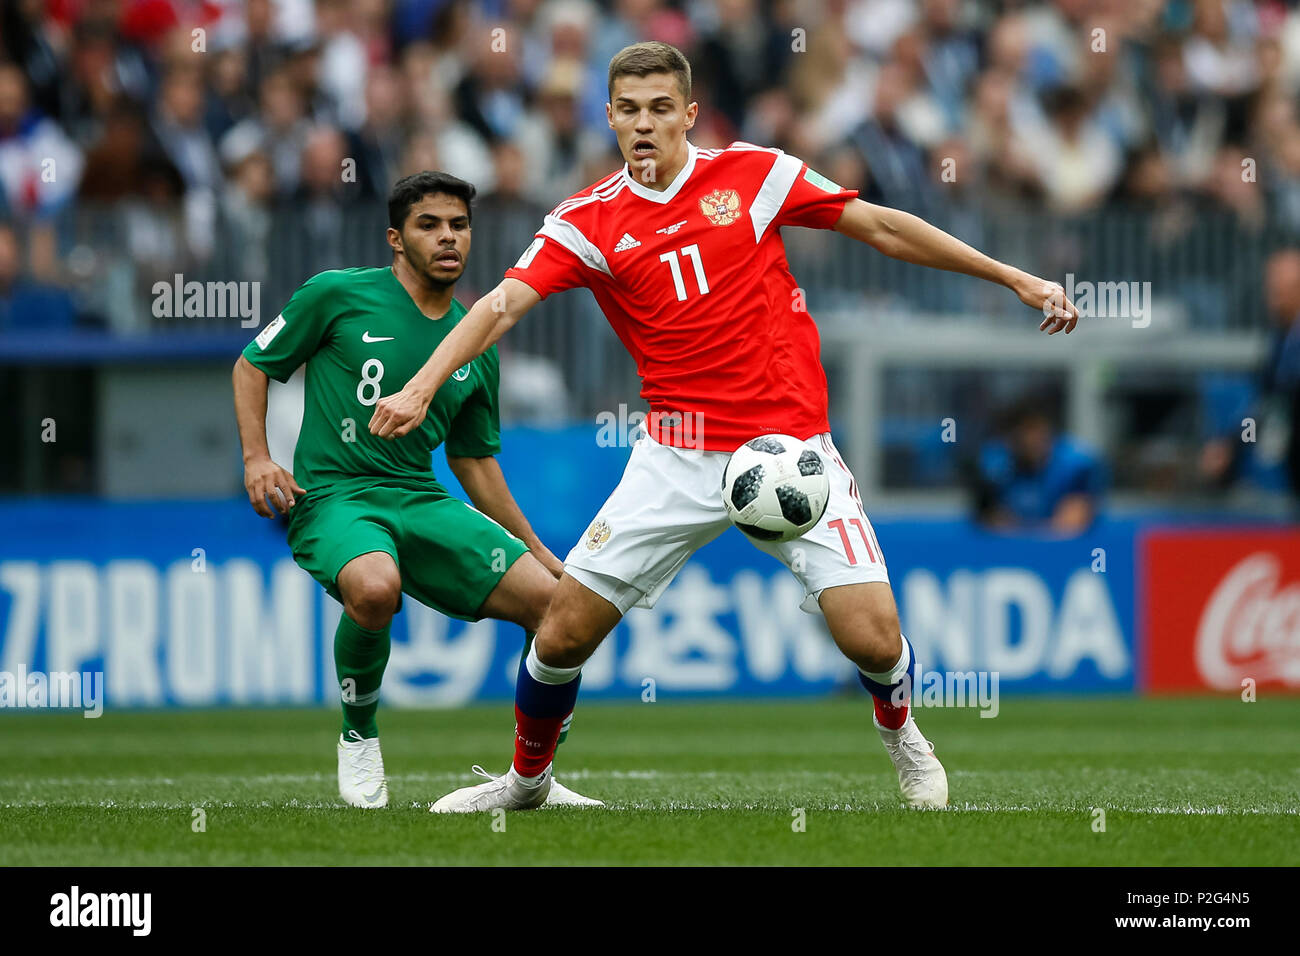 Moscow, Russia. 14th June 2018. Yahya Al-Shehri of Saudi Arabia and Roman Zobnin of Russia during the 2018 FIFA World Cup Group A match between Russia and Saudi Arabia at Luzhniki Stadium on June 14th 2018 in Moscow, Russia. Credit: PHC Images/Alamy Live News Stock Photo